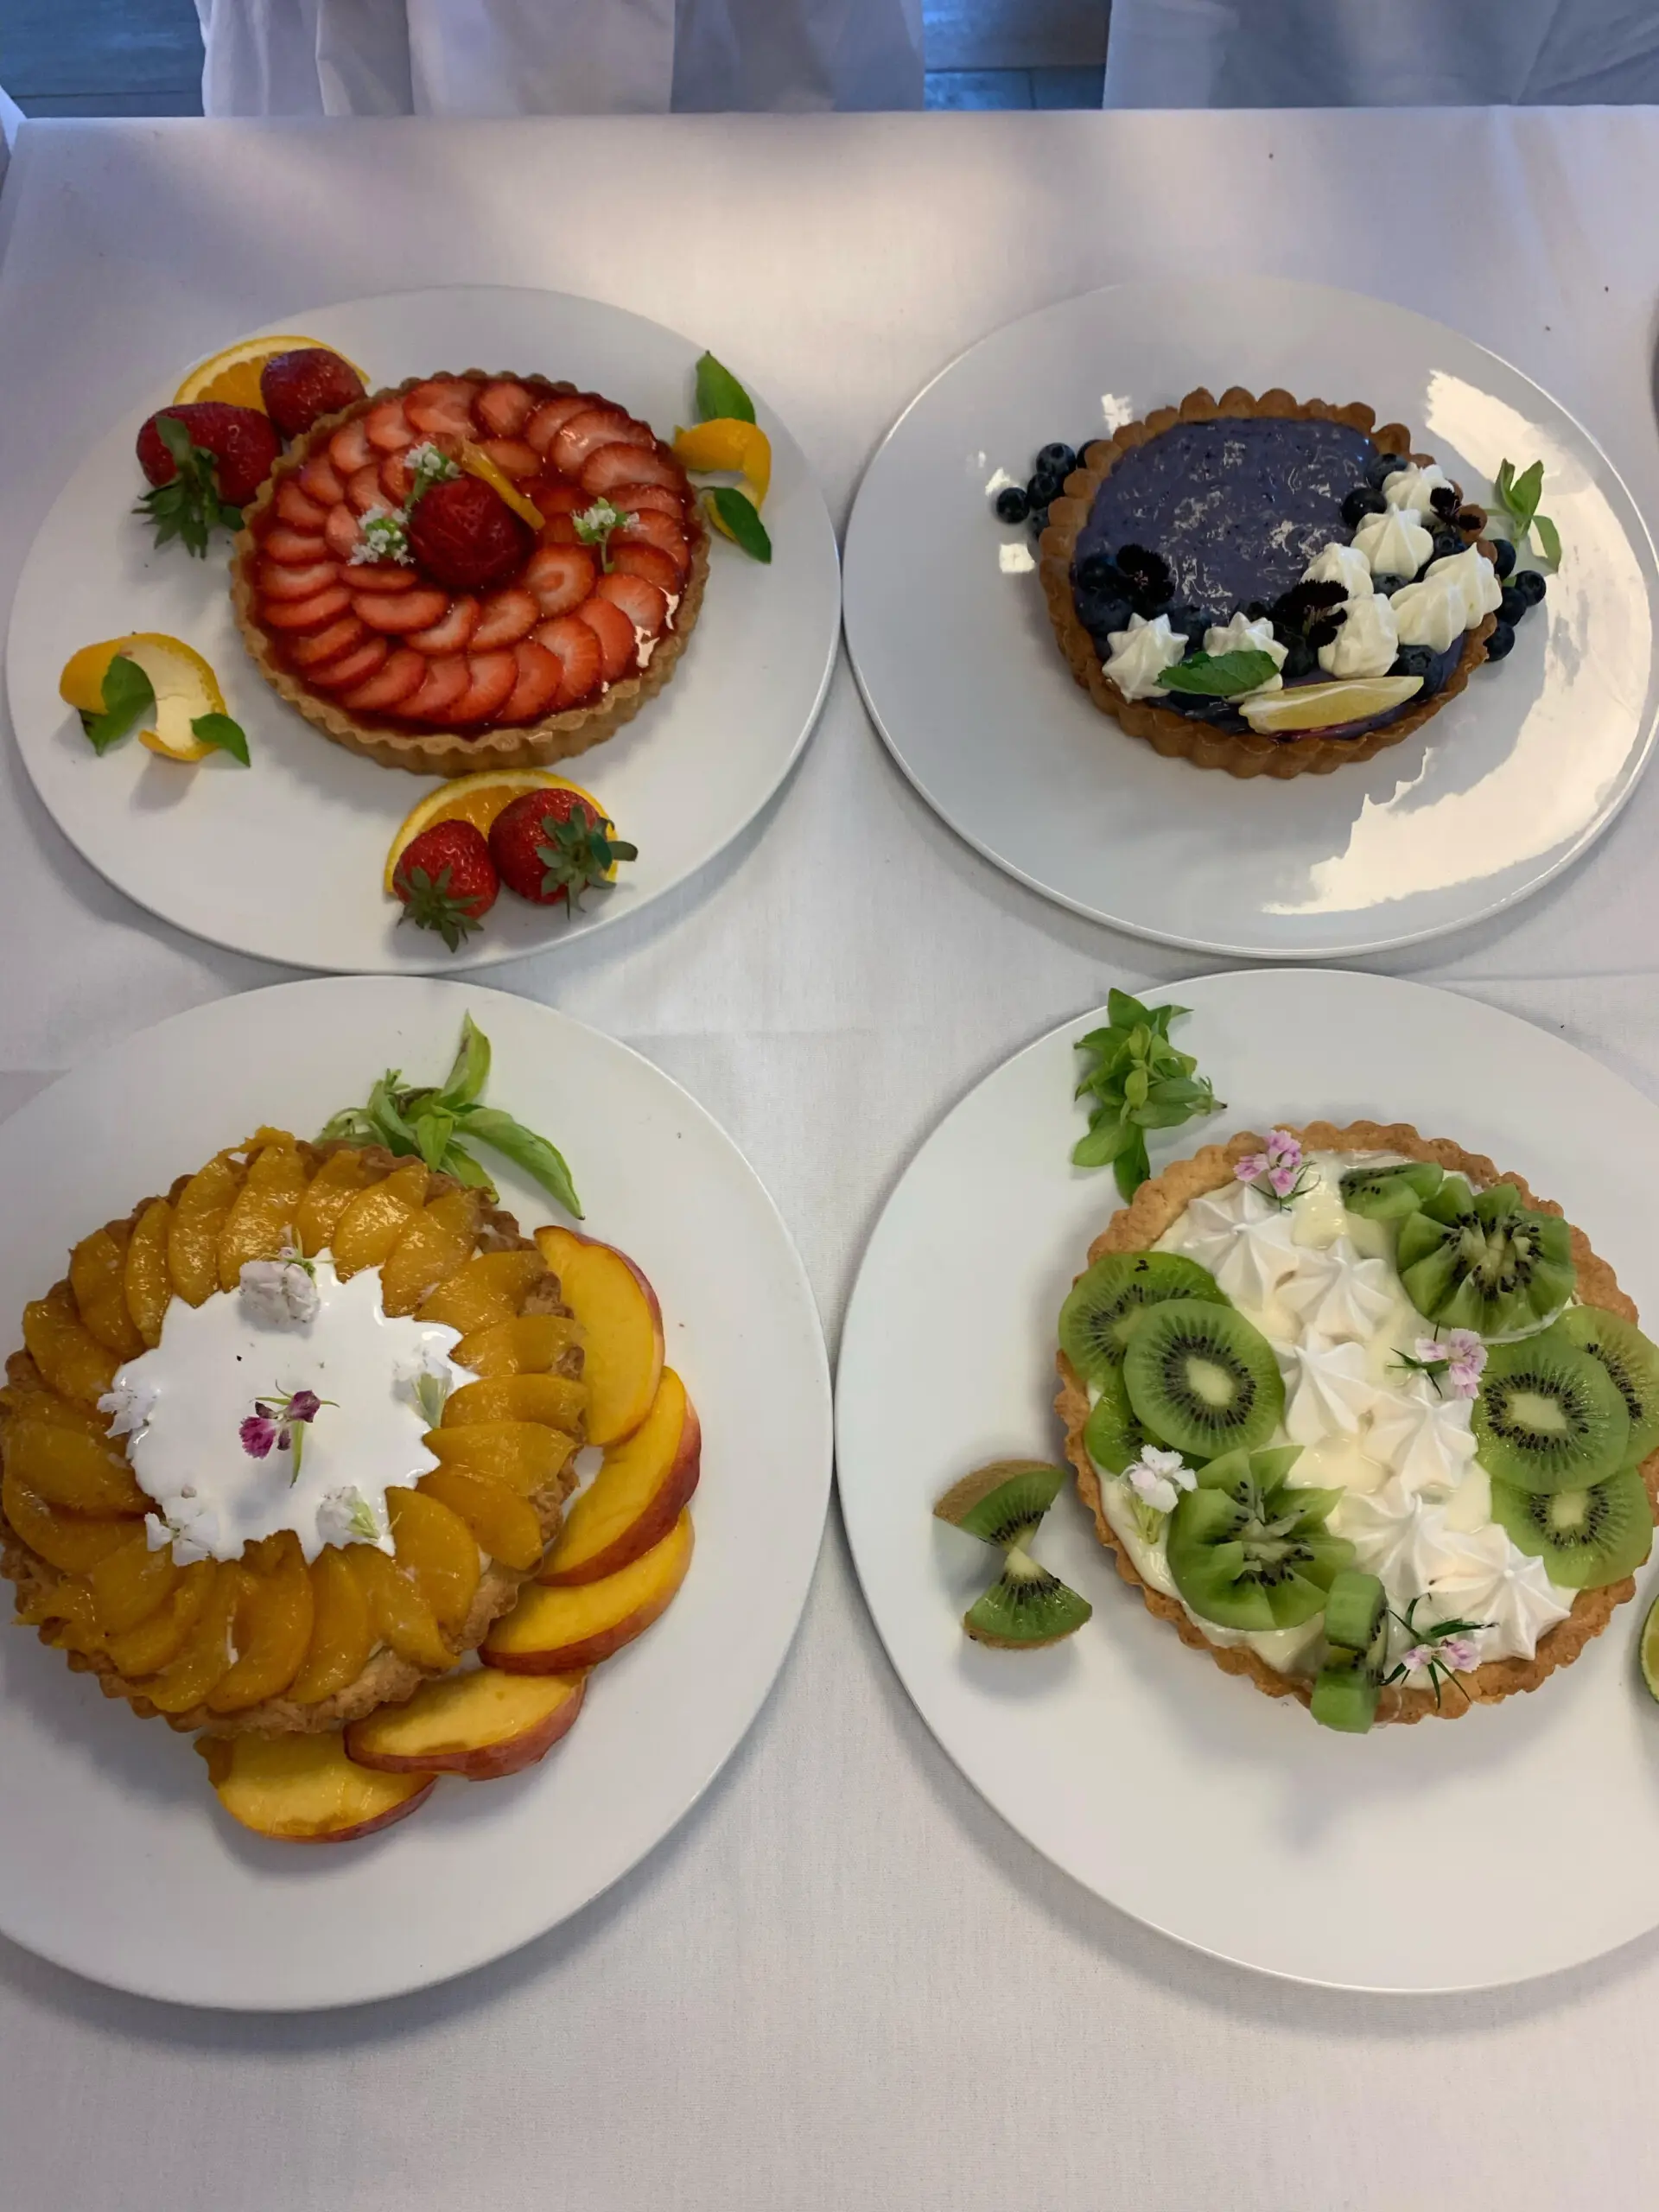 Four professional looking dessert tarts each on its own plate